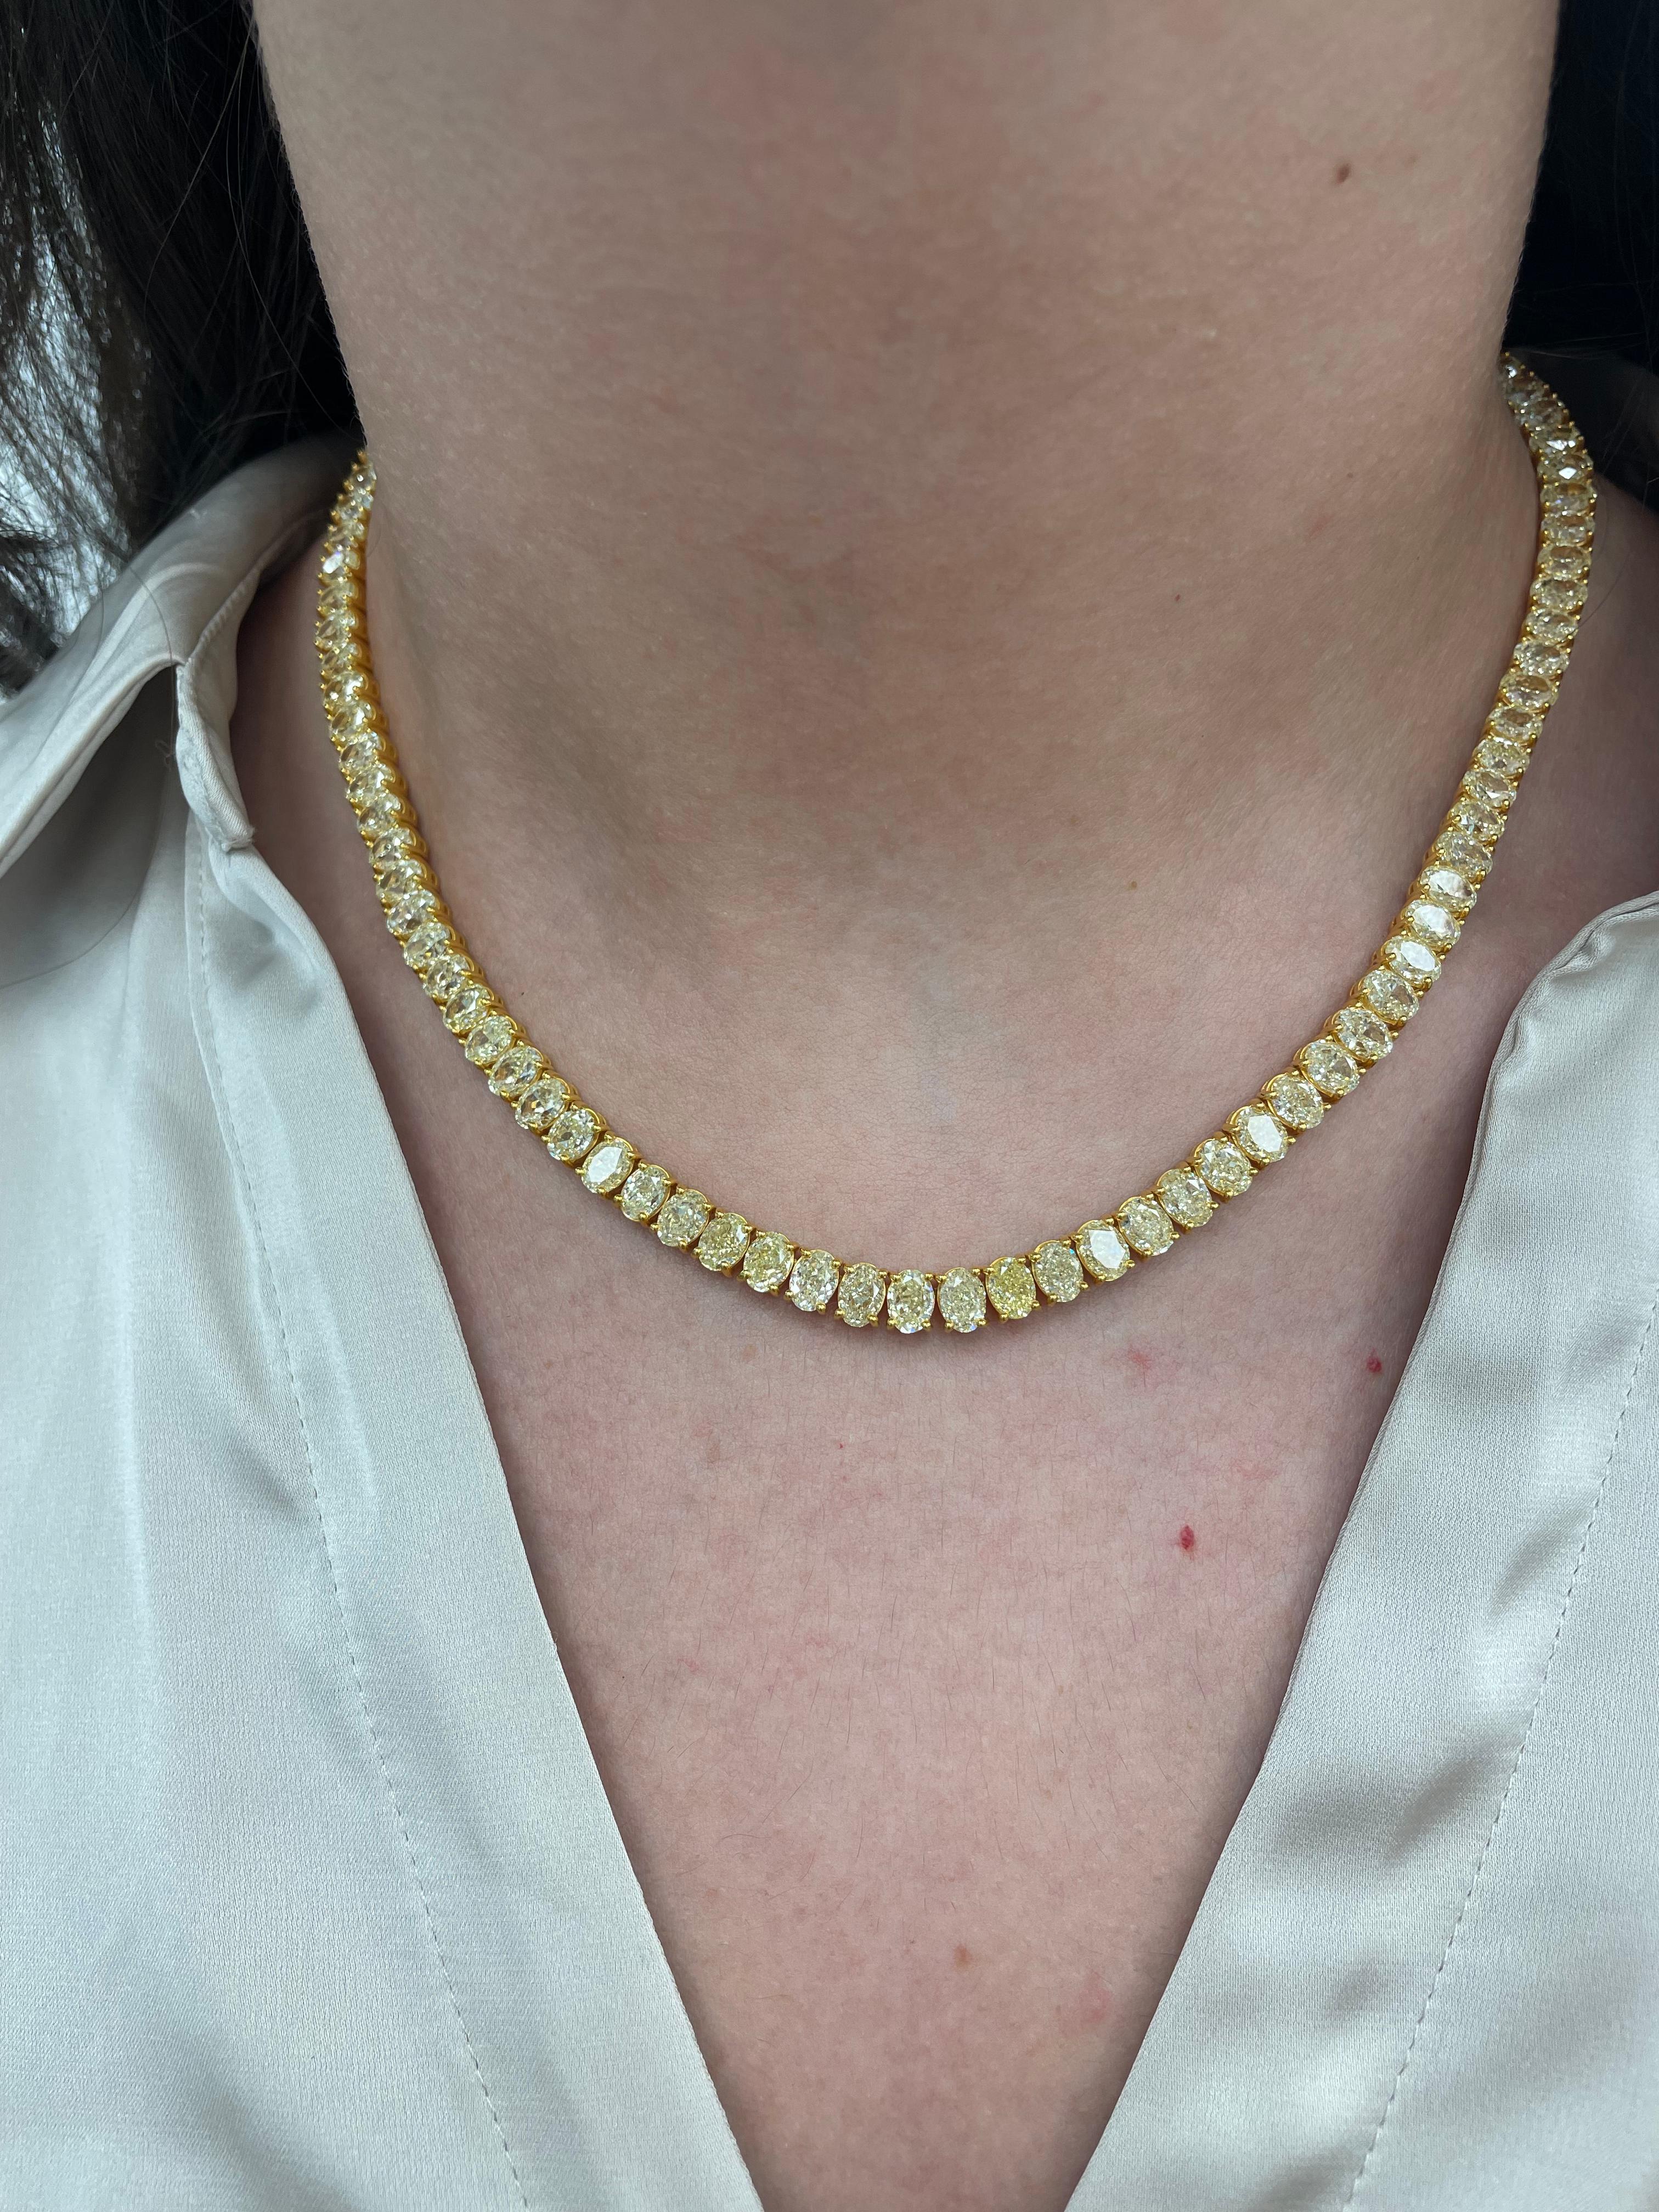 Stunning fancy yellow oval diamond tennis necklace, difficult to find and match the stones. High jewelry by Alexander Beverly Hills.
99 oval diamonds, 43.45 carats total. Approximately Fancy Yellow color and SI clarity. Four prong set in 18k yellow